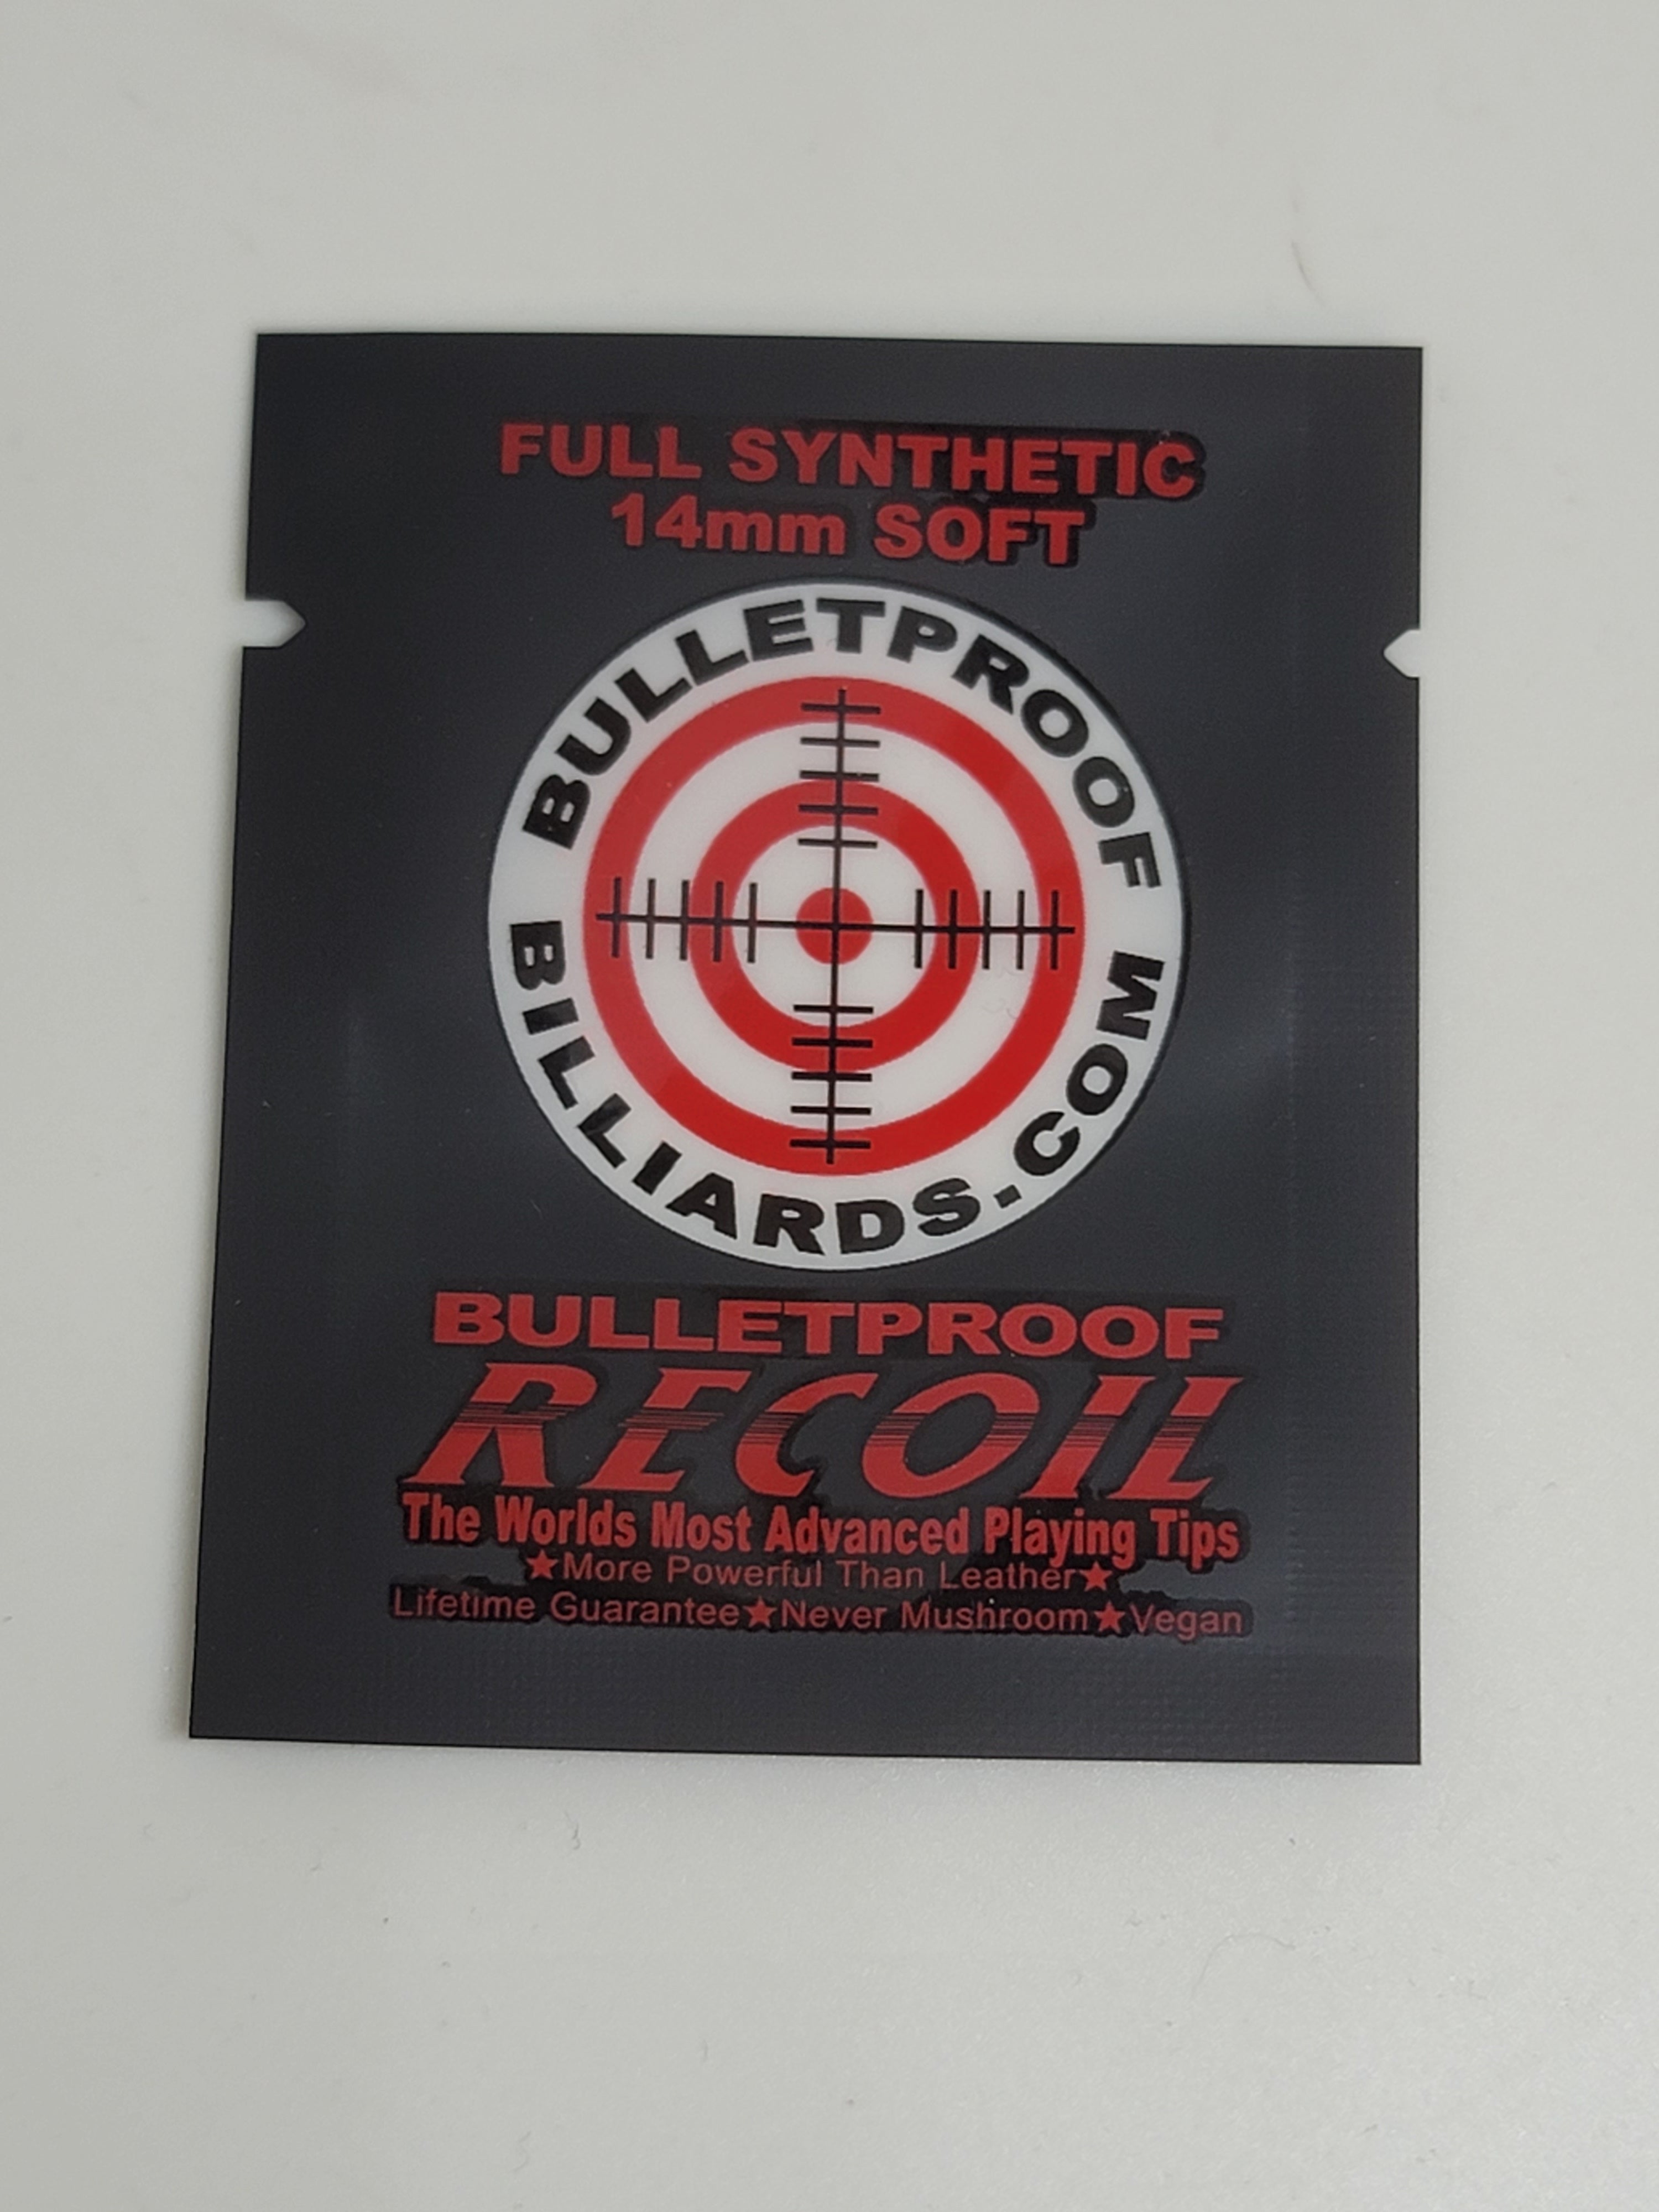 Bulletproof RECOIL Full Synthetic Playing Tip